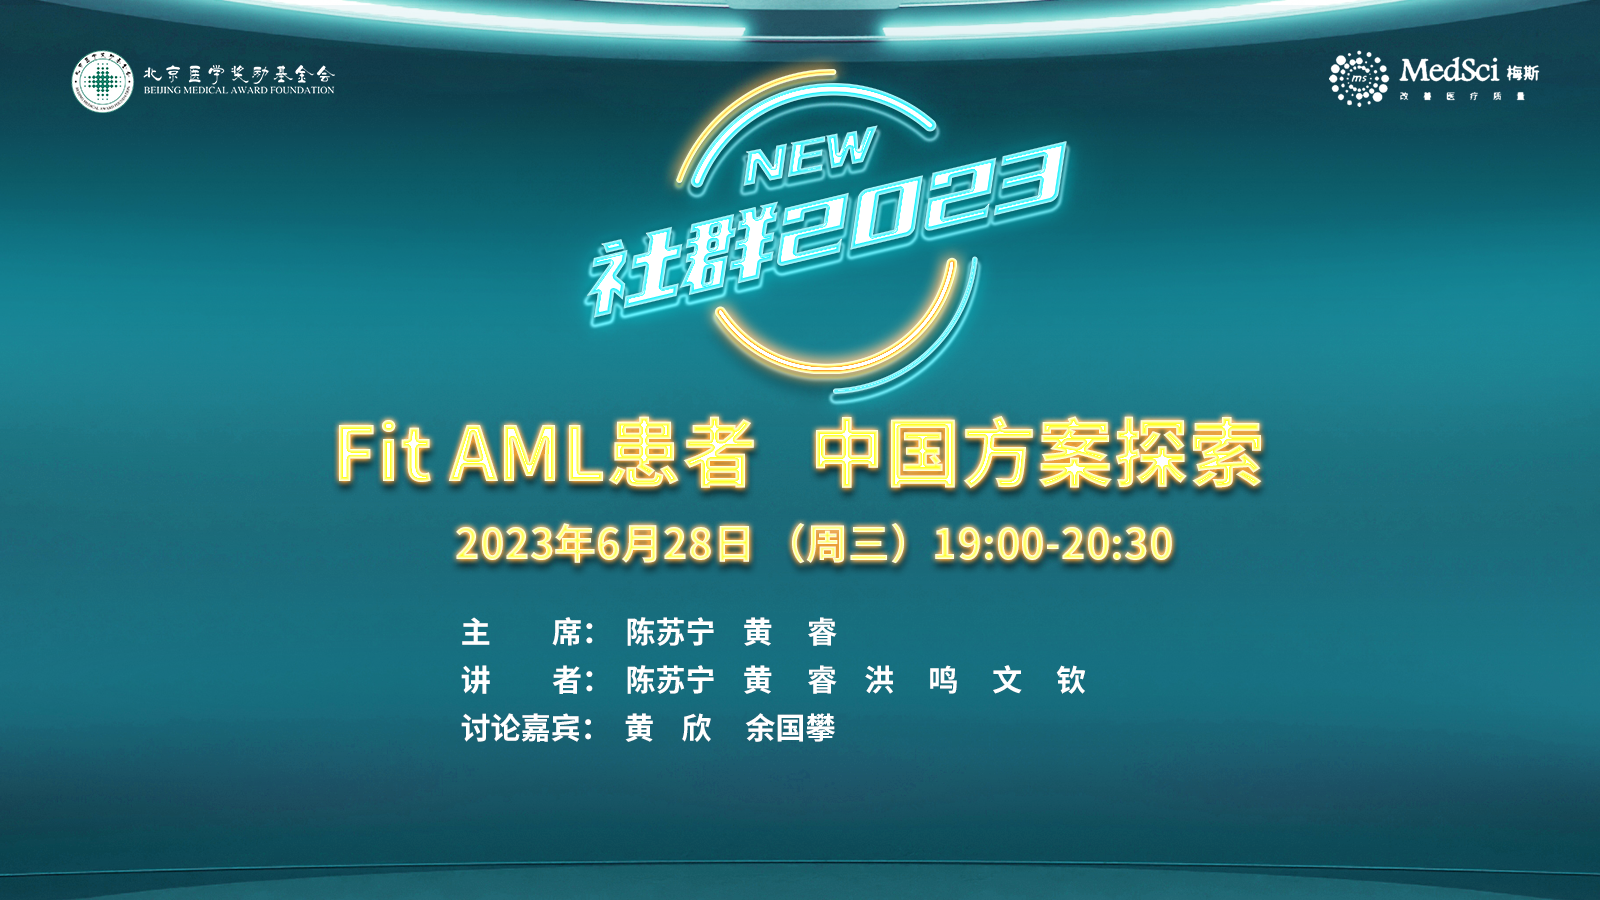 Fit AML<font color="red">患者</font>中国方案探索